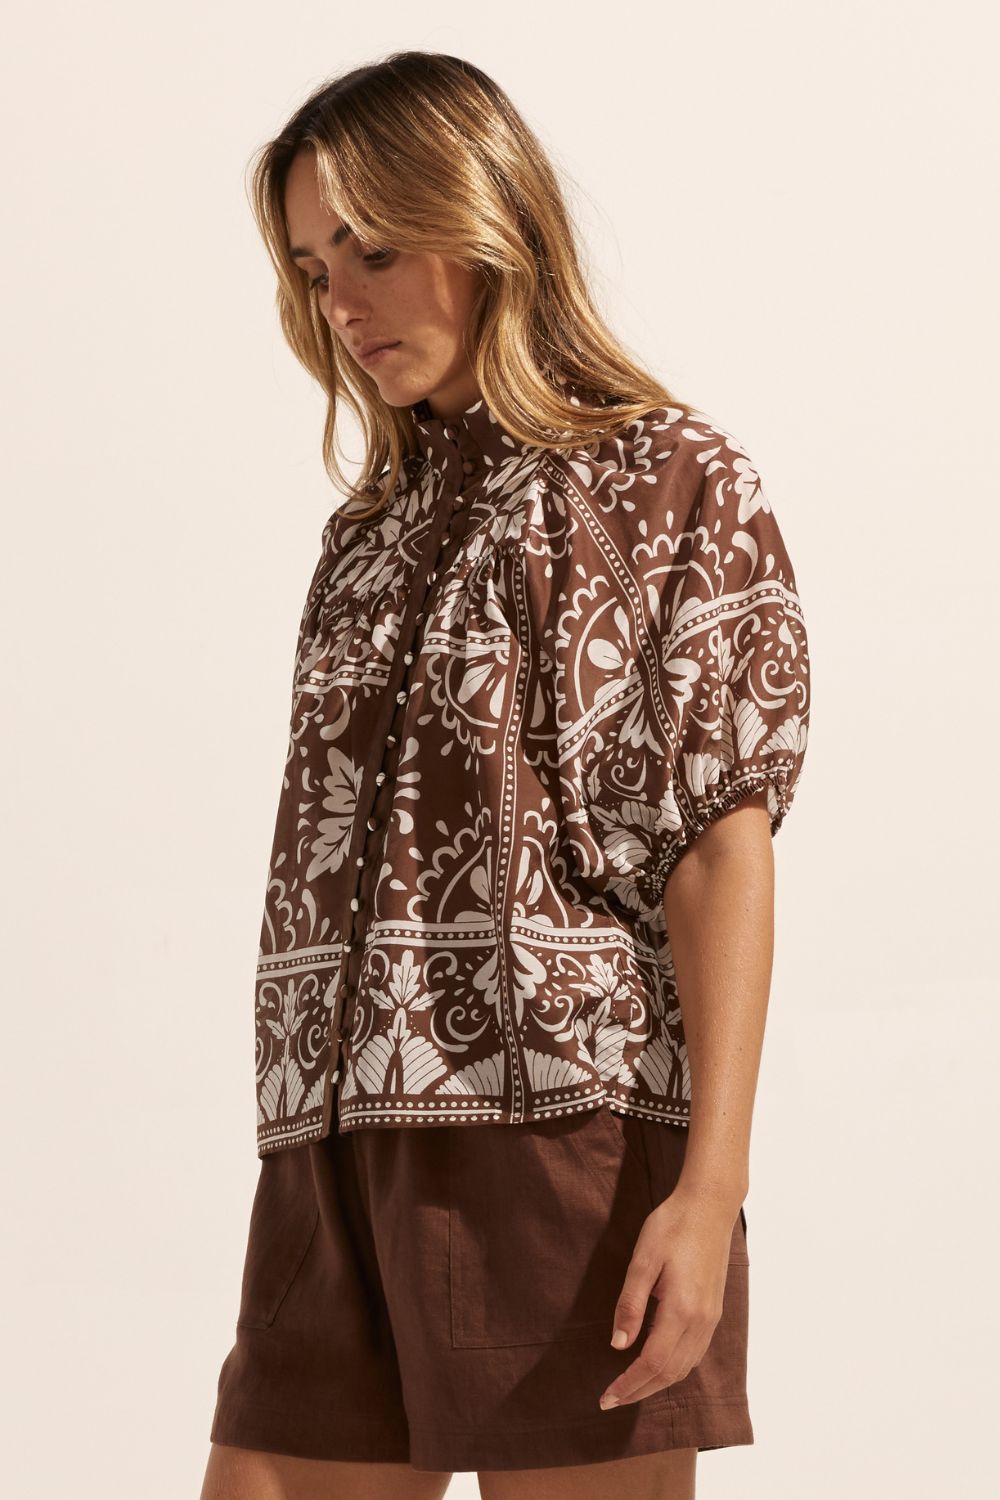 brown and white print, top, high neck, button down, mid length sleeve, side image